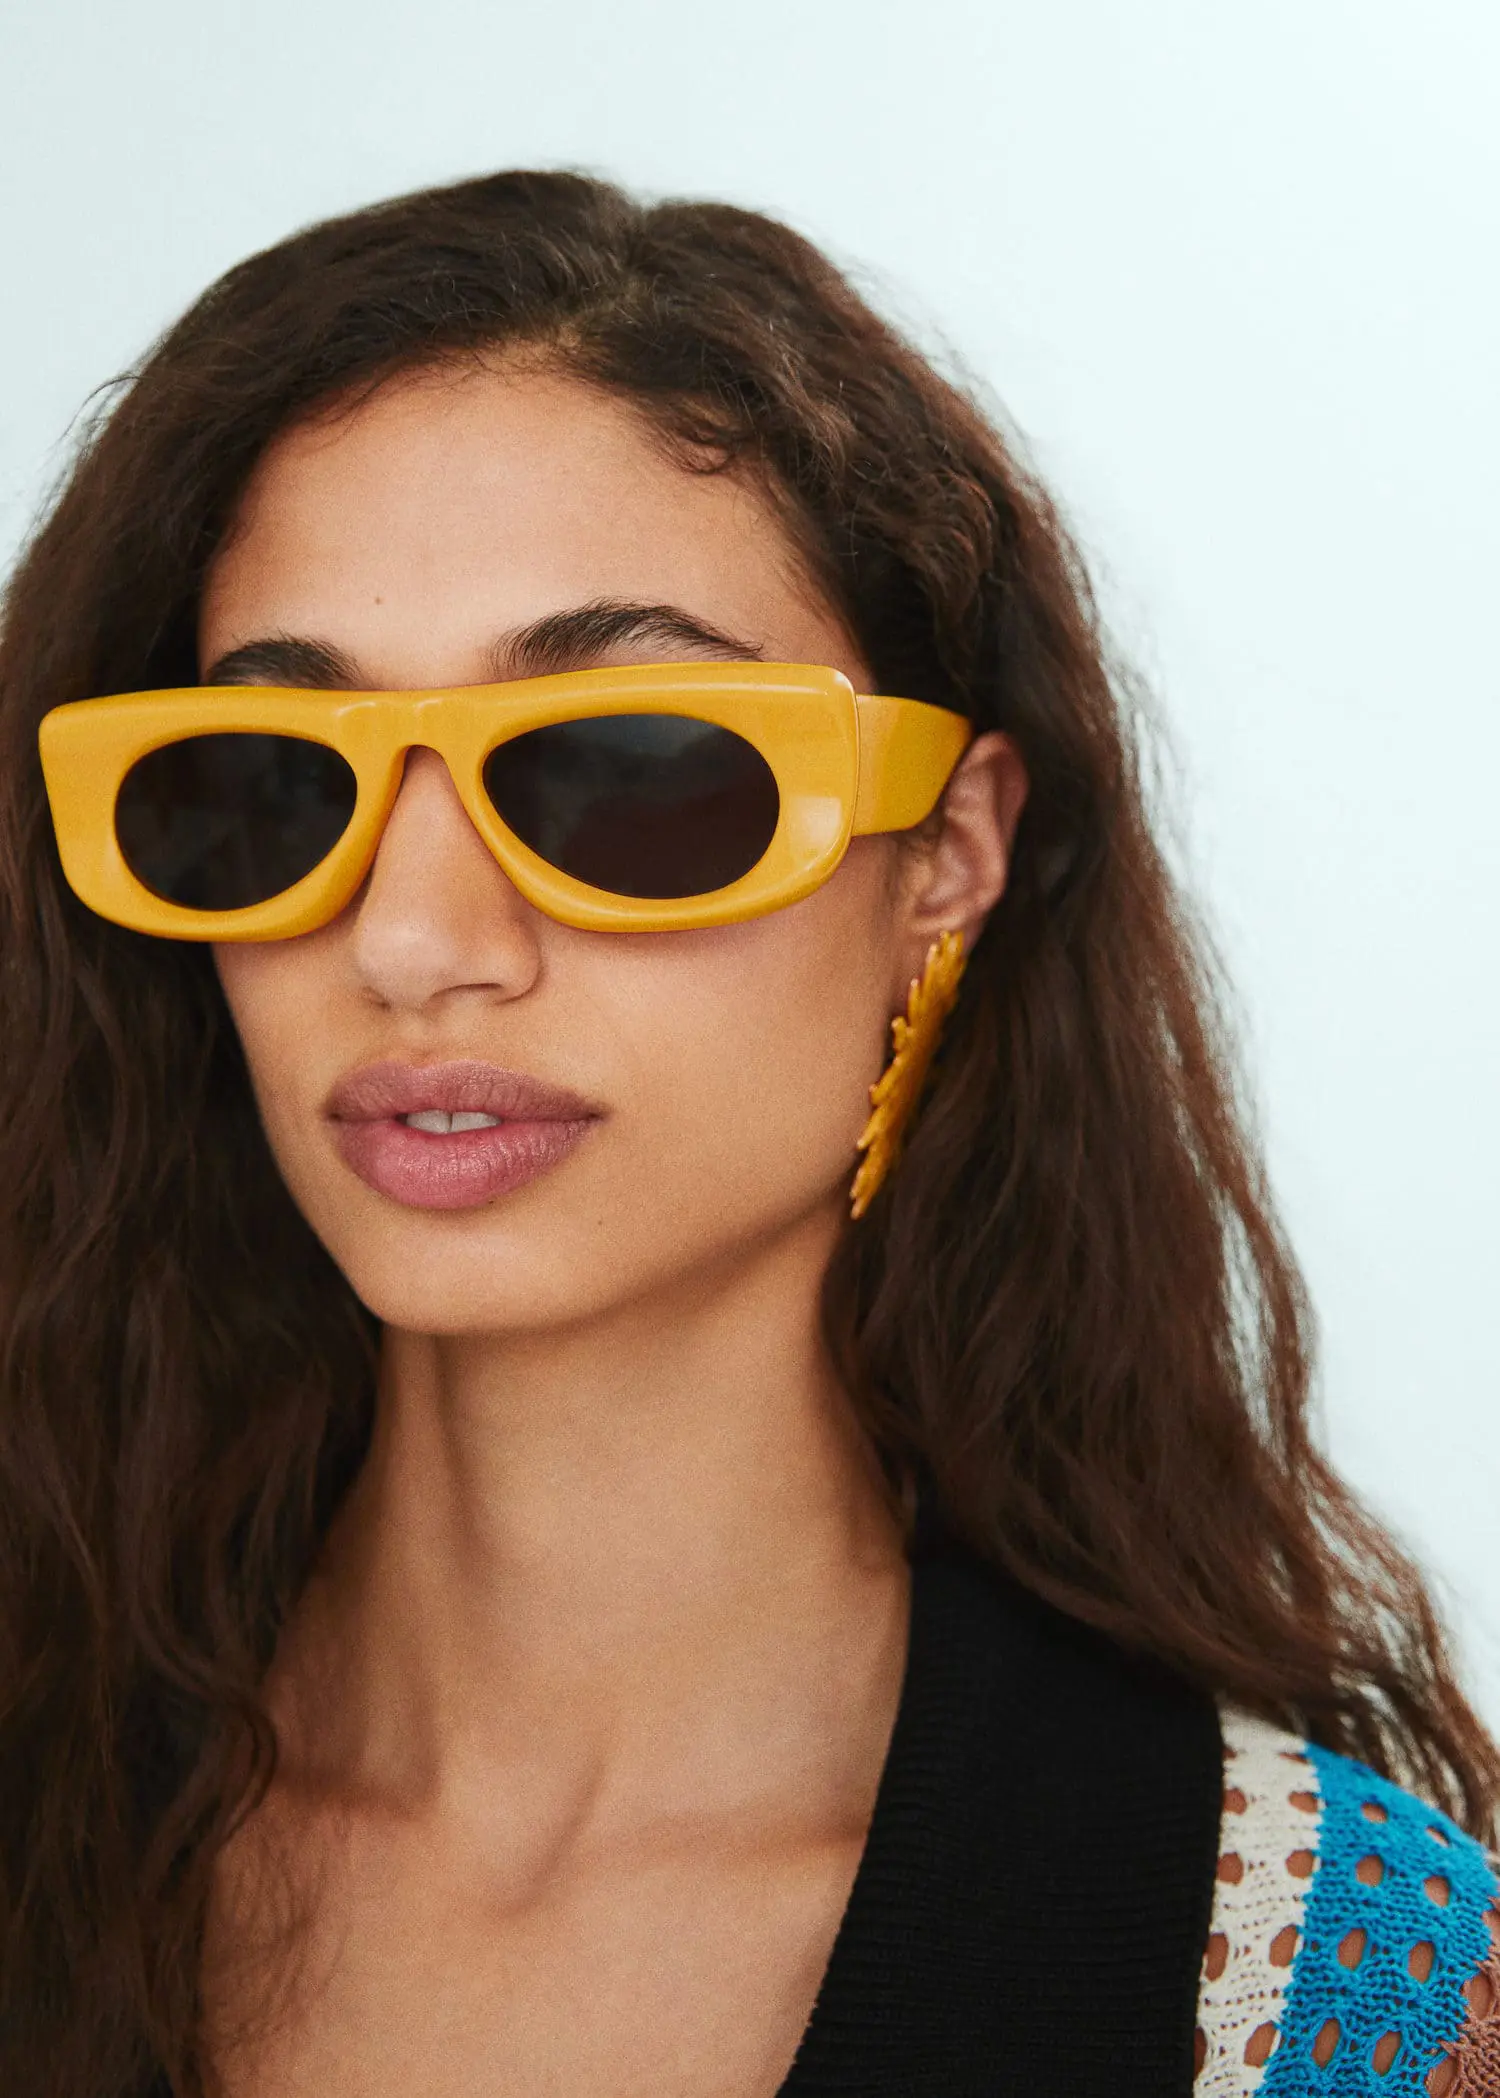 Mango Volume frame sunglasses. a woman with long brown hair wearing sunglasses. 